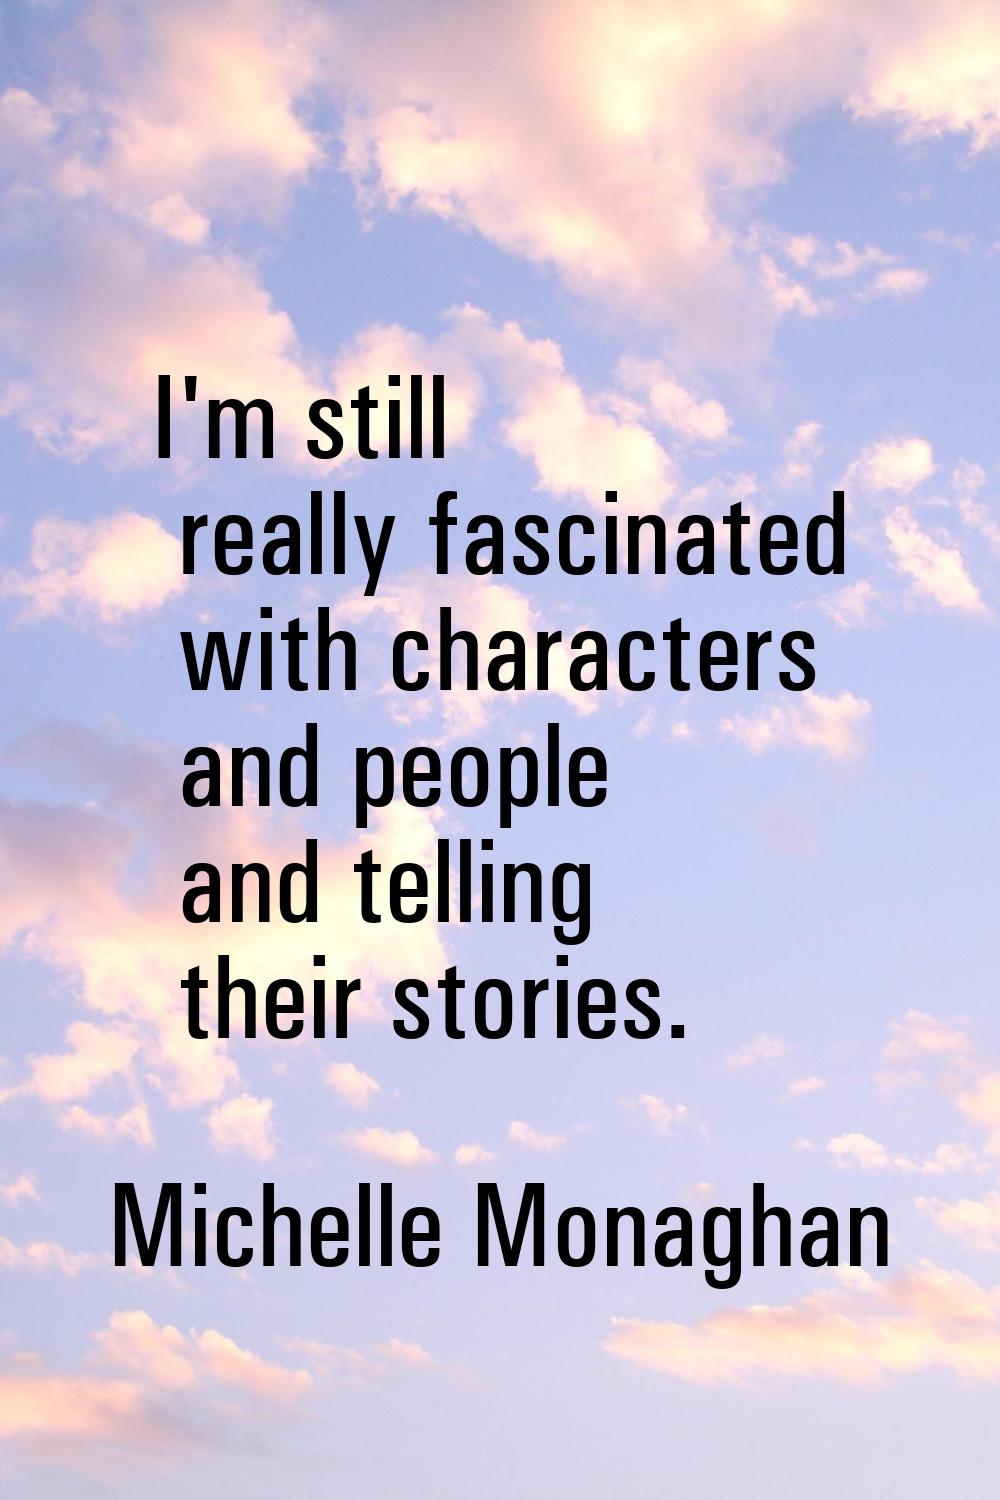 I'm still really fascinated with characters and people and telling their stories.